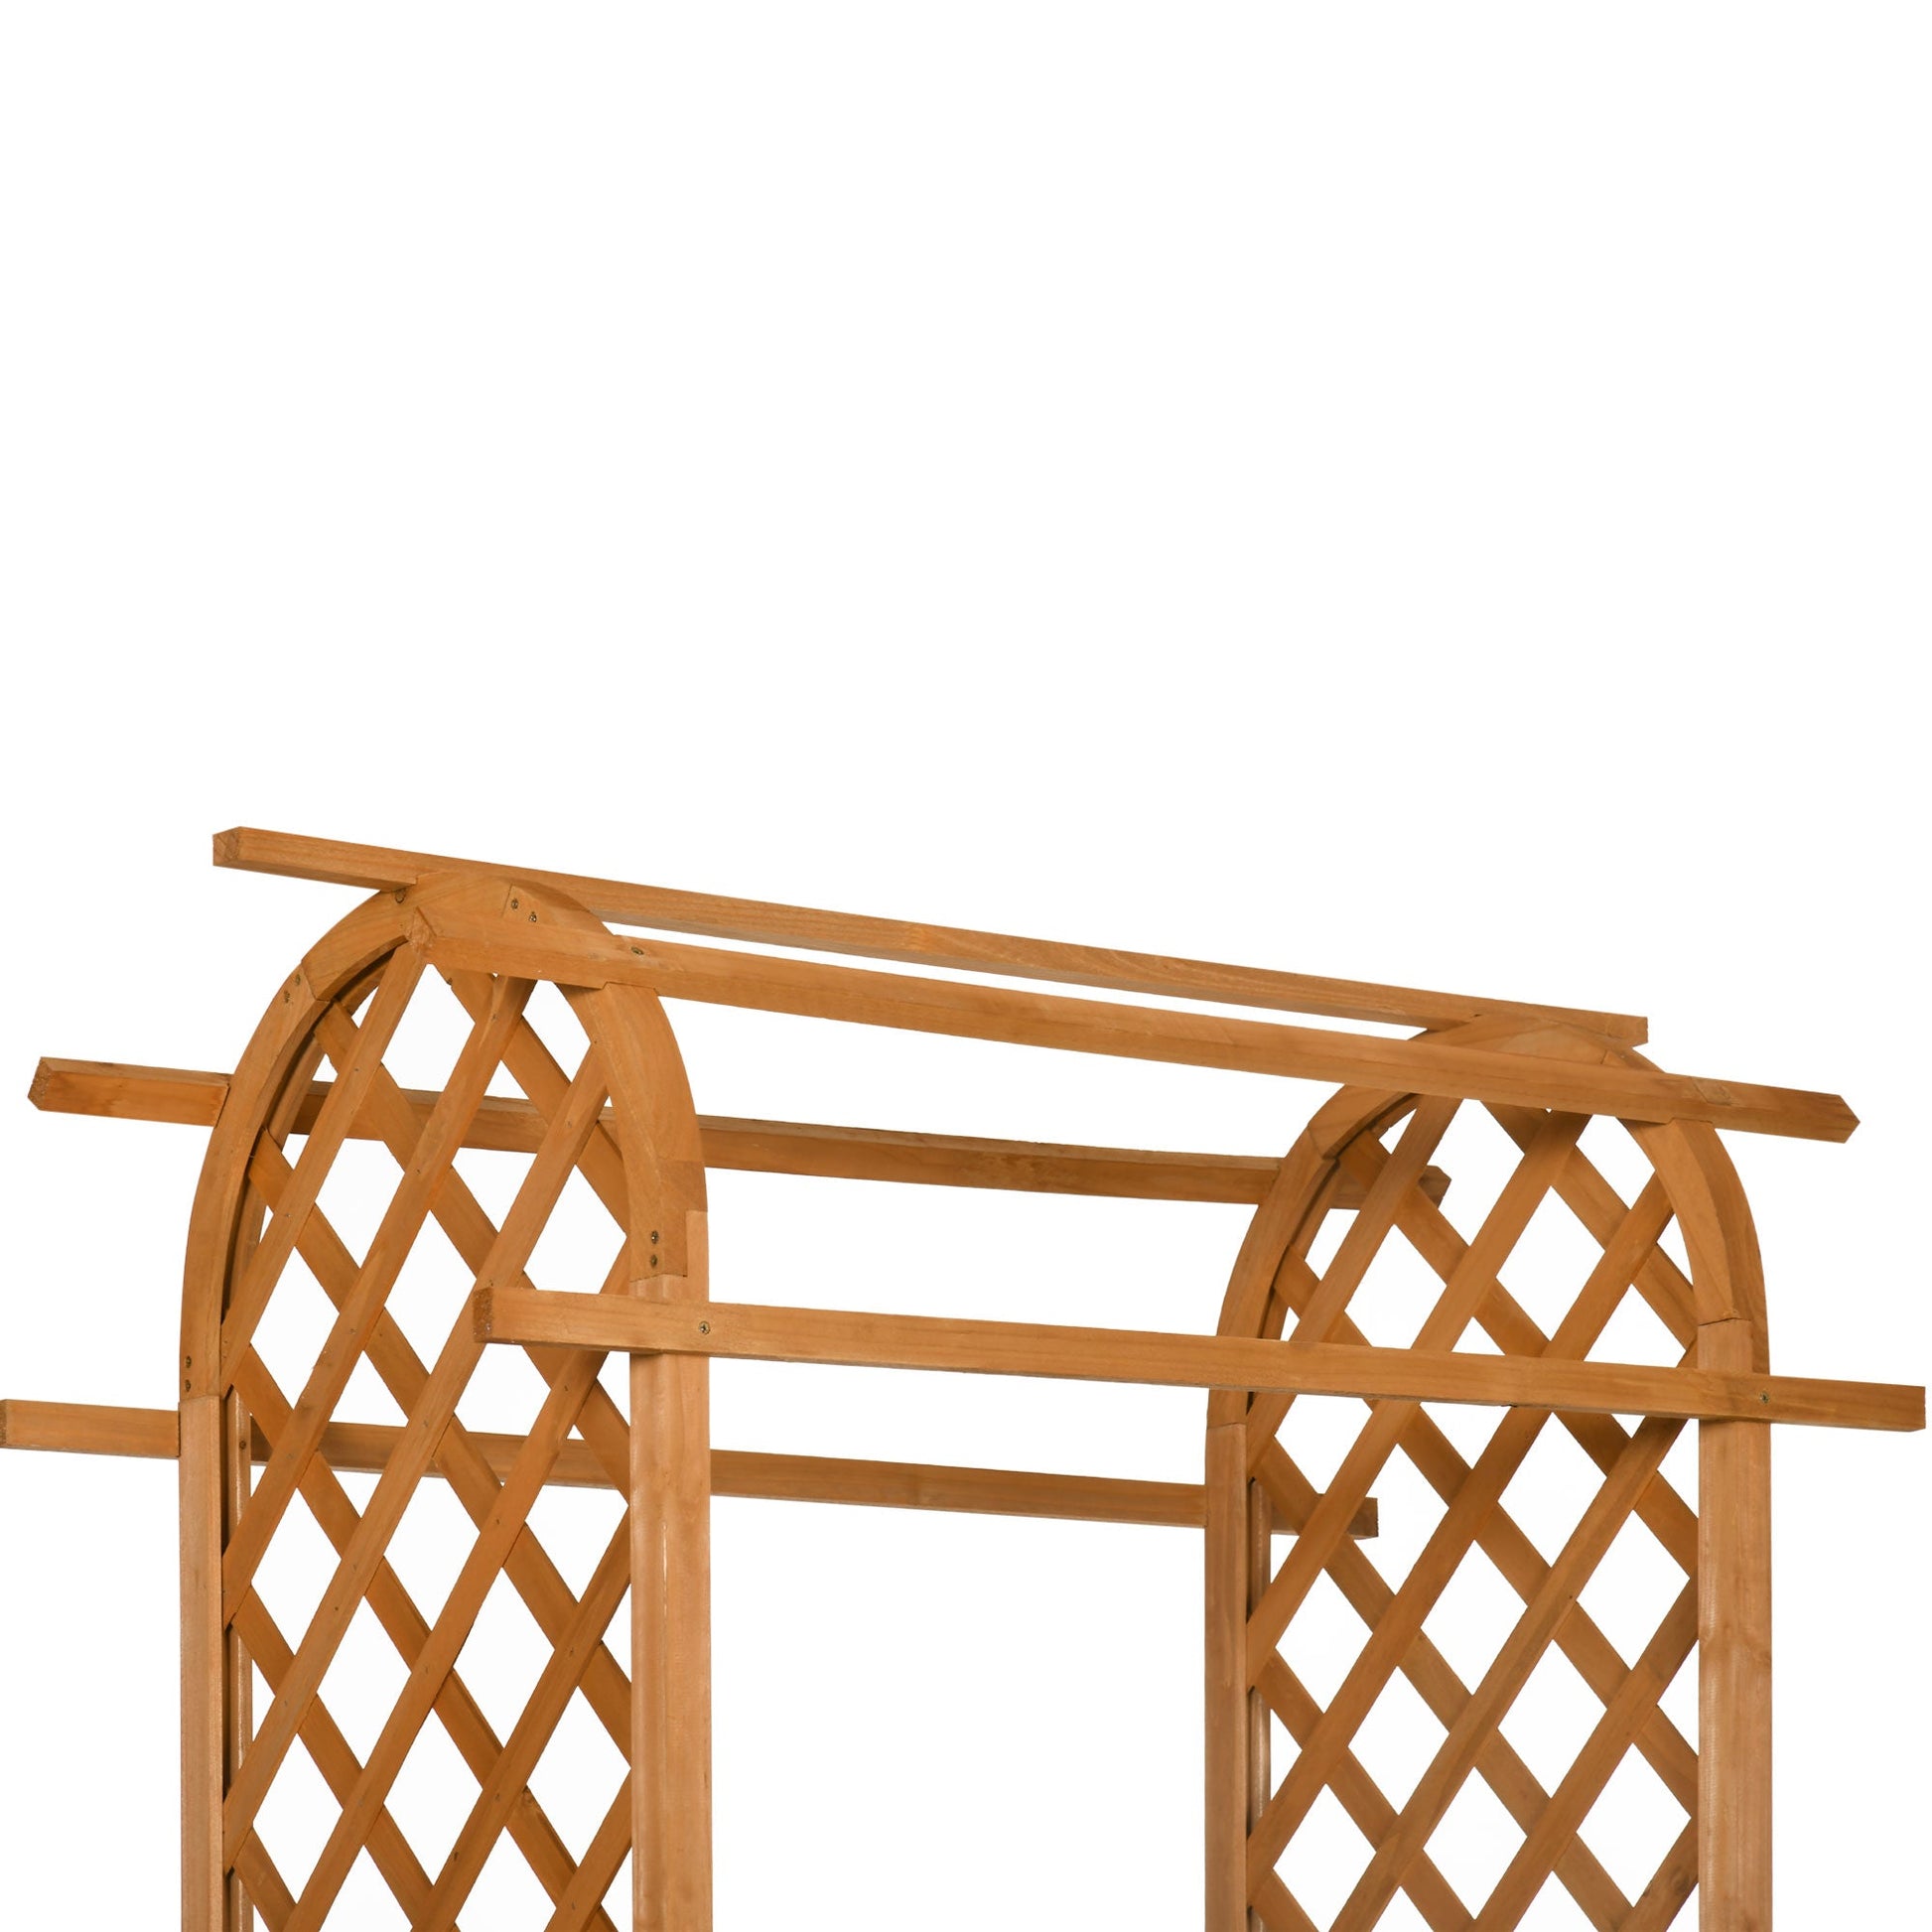 7.7FT Garden Arch with 2 Foldable Planter Boxes, Outdoor Wooden Trellis Arbor for Ceremony Party Weddings, Brown at Gallery Canada